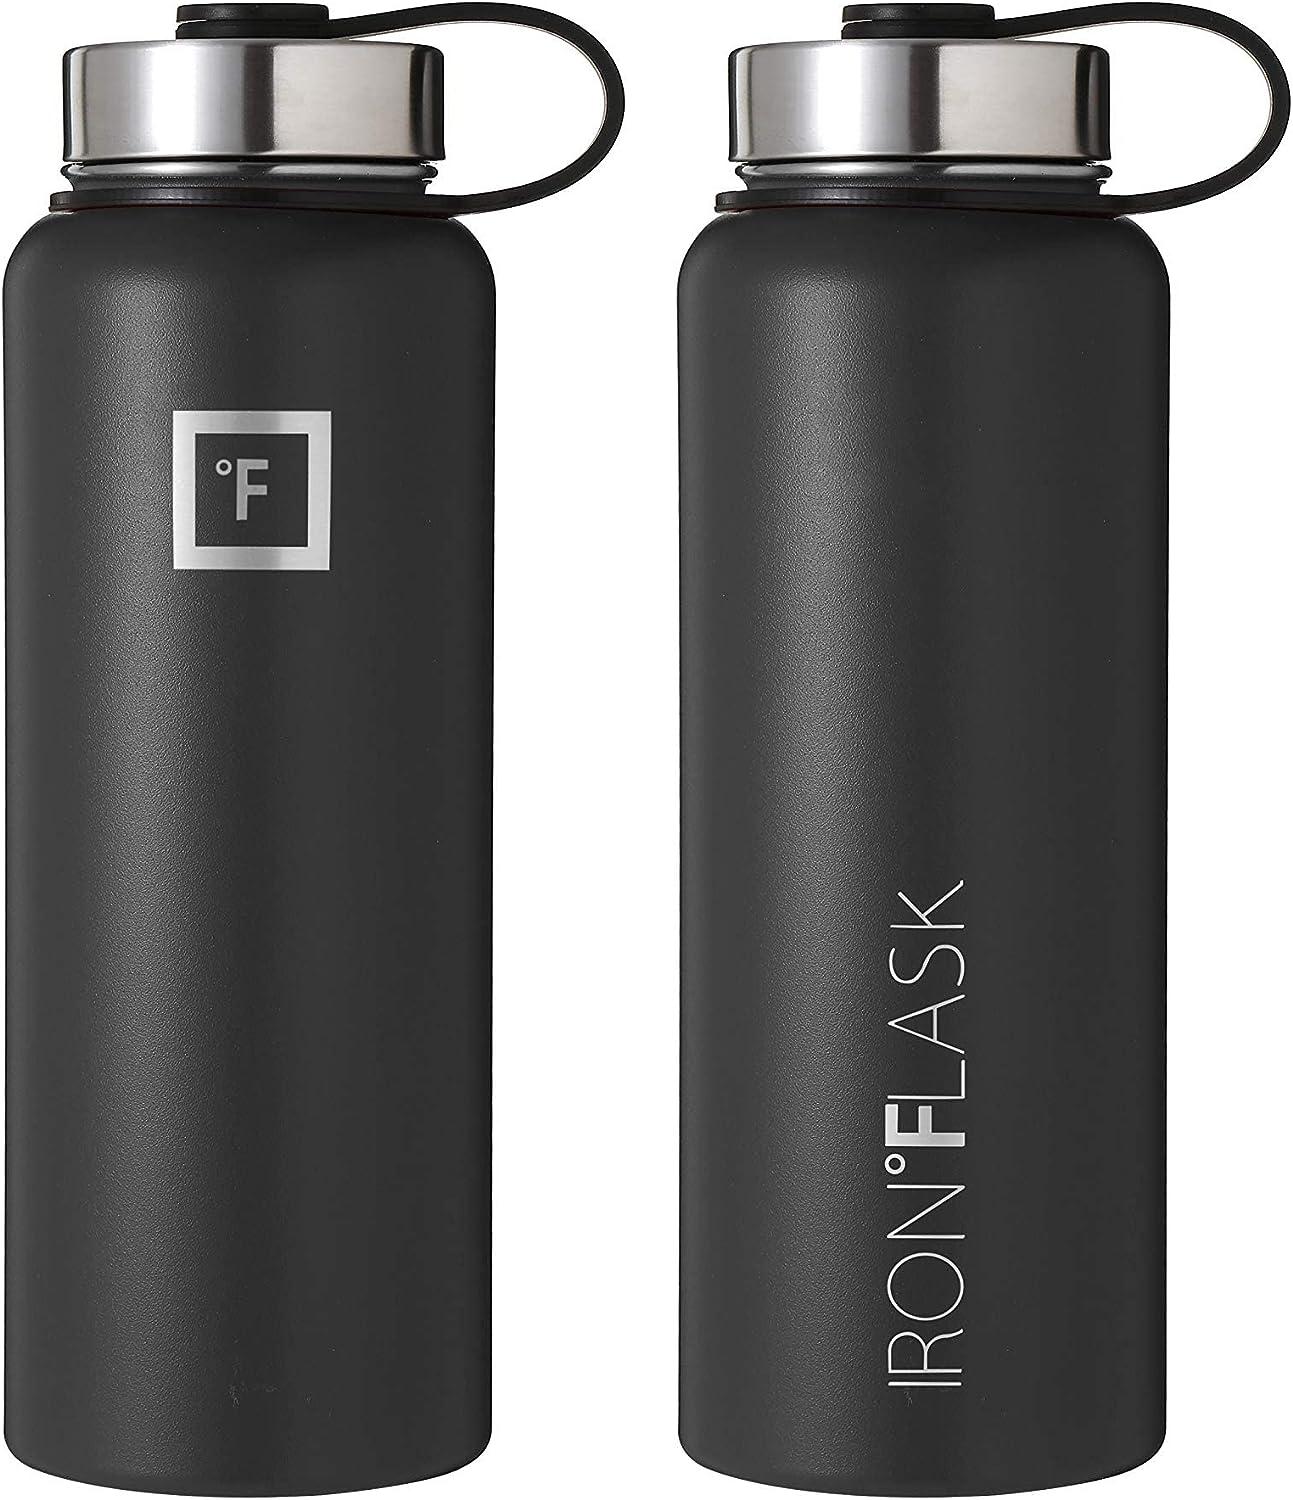 32 oz 40 oz 64 oz Stainless Steel Water Bottle, Insulated Double